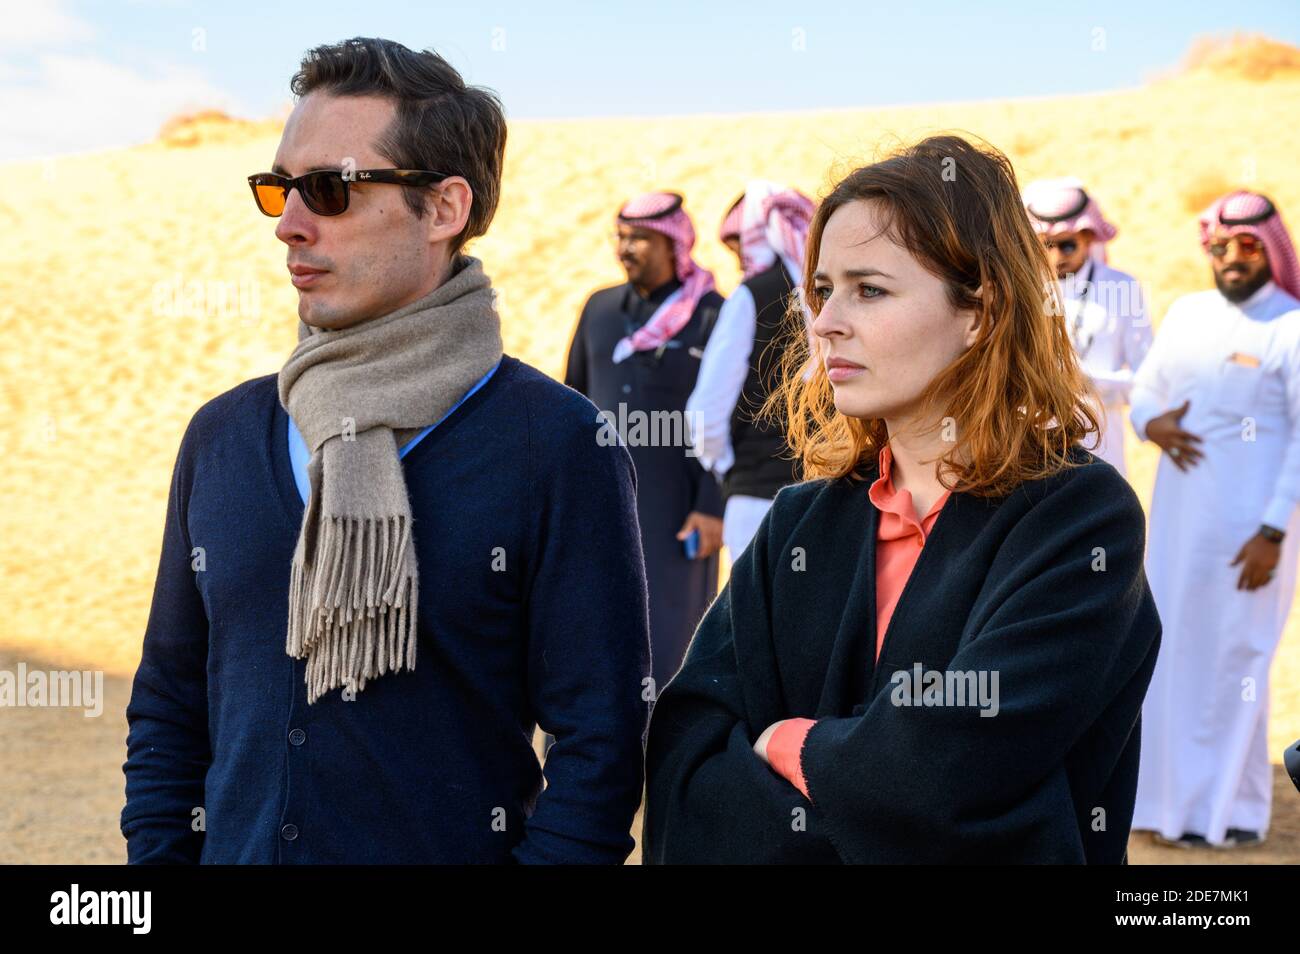 French Member of Parliament Jean-Baptiste Djebbari and wife Fiona Sisso  seen during a visit to Mada'in Salih area, near the town of Al Ula, Saudi  Arabia on January 4, 2019, as part